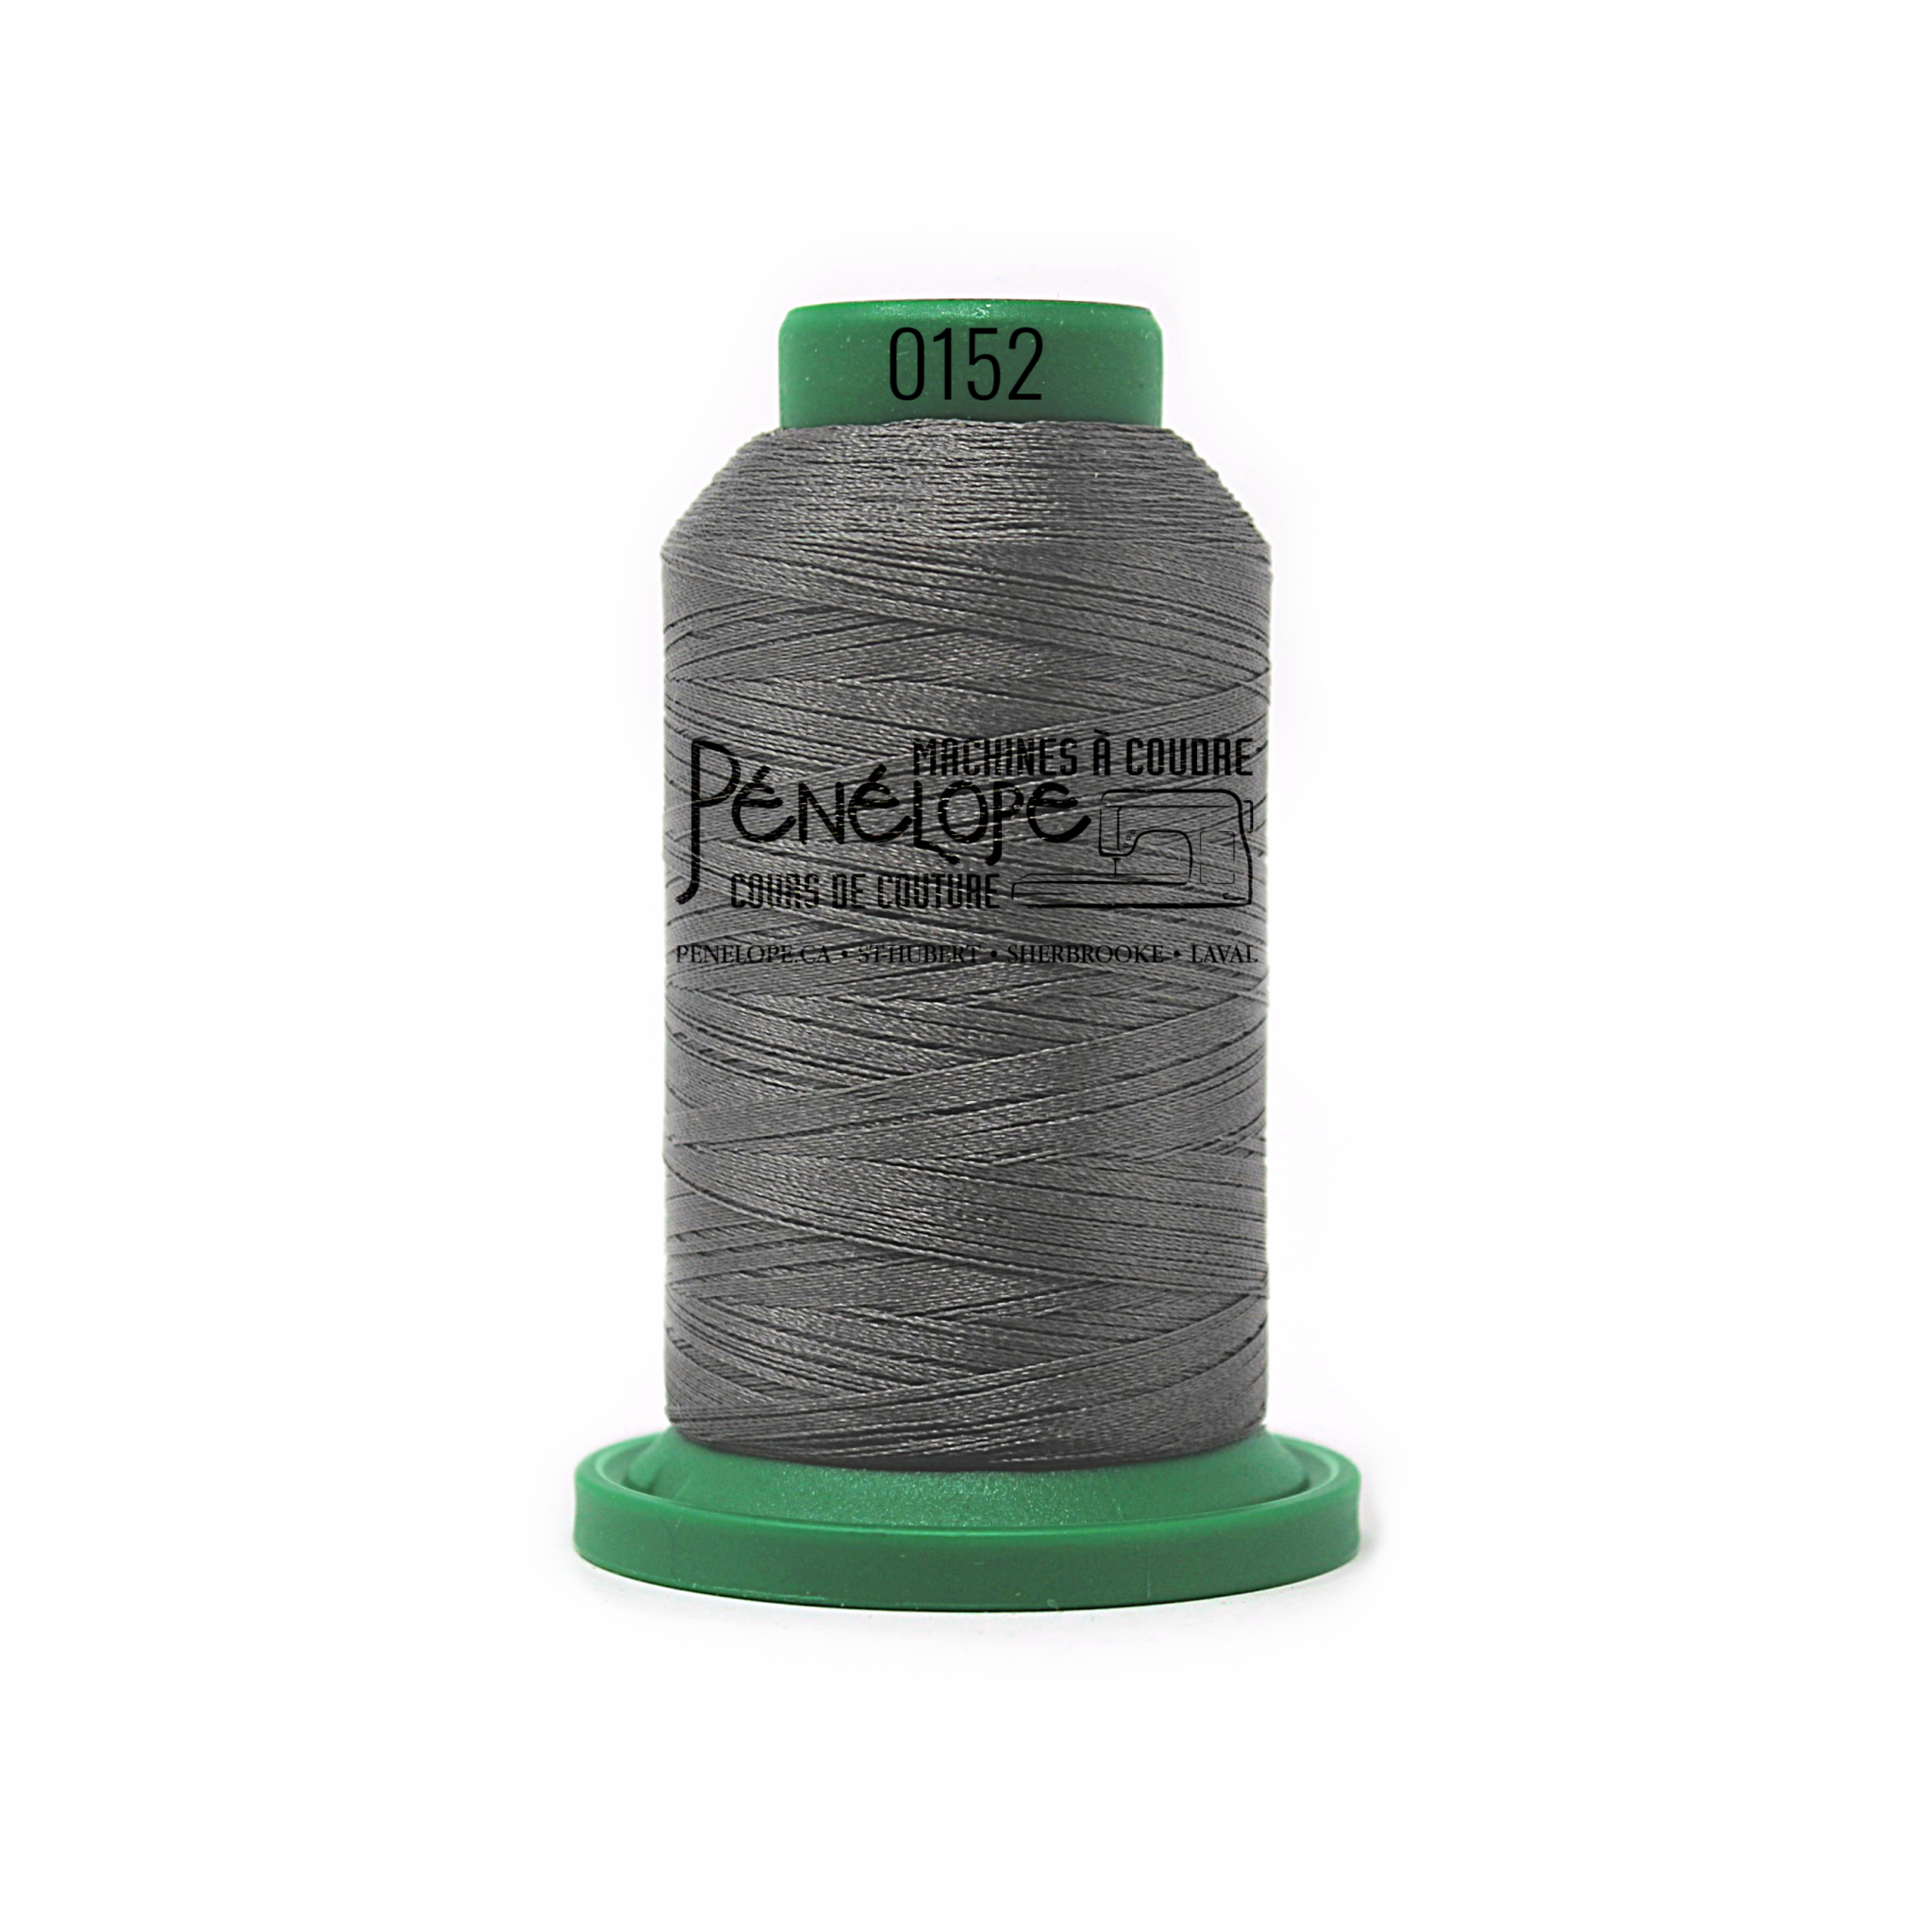 Isacord Isacord sewing and embroidery thread 0152